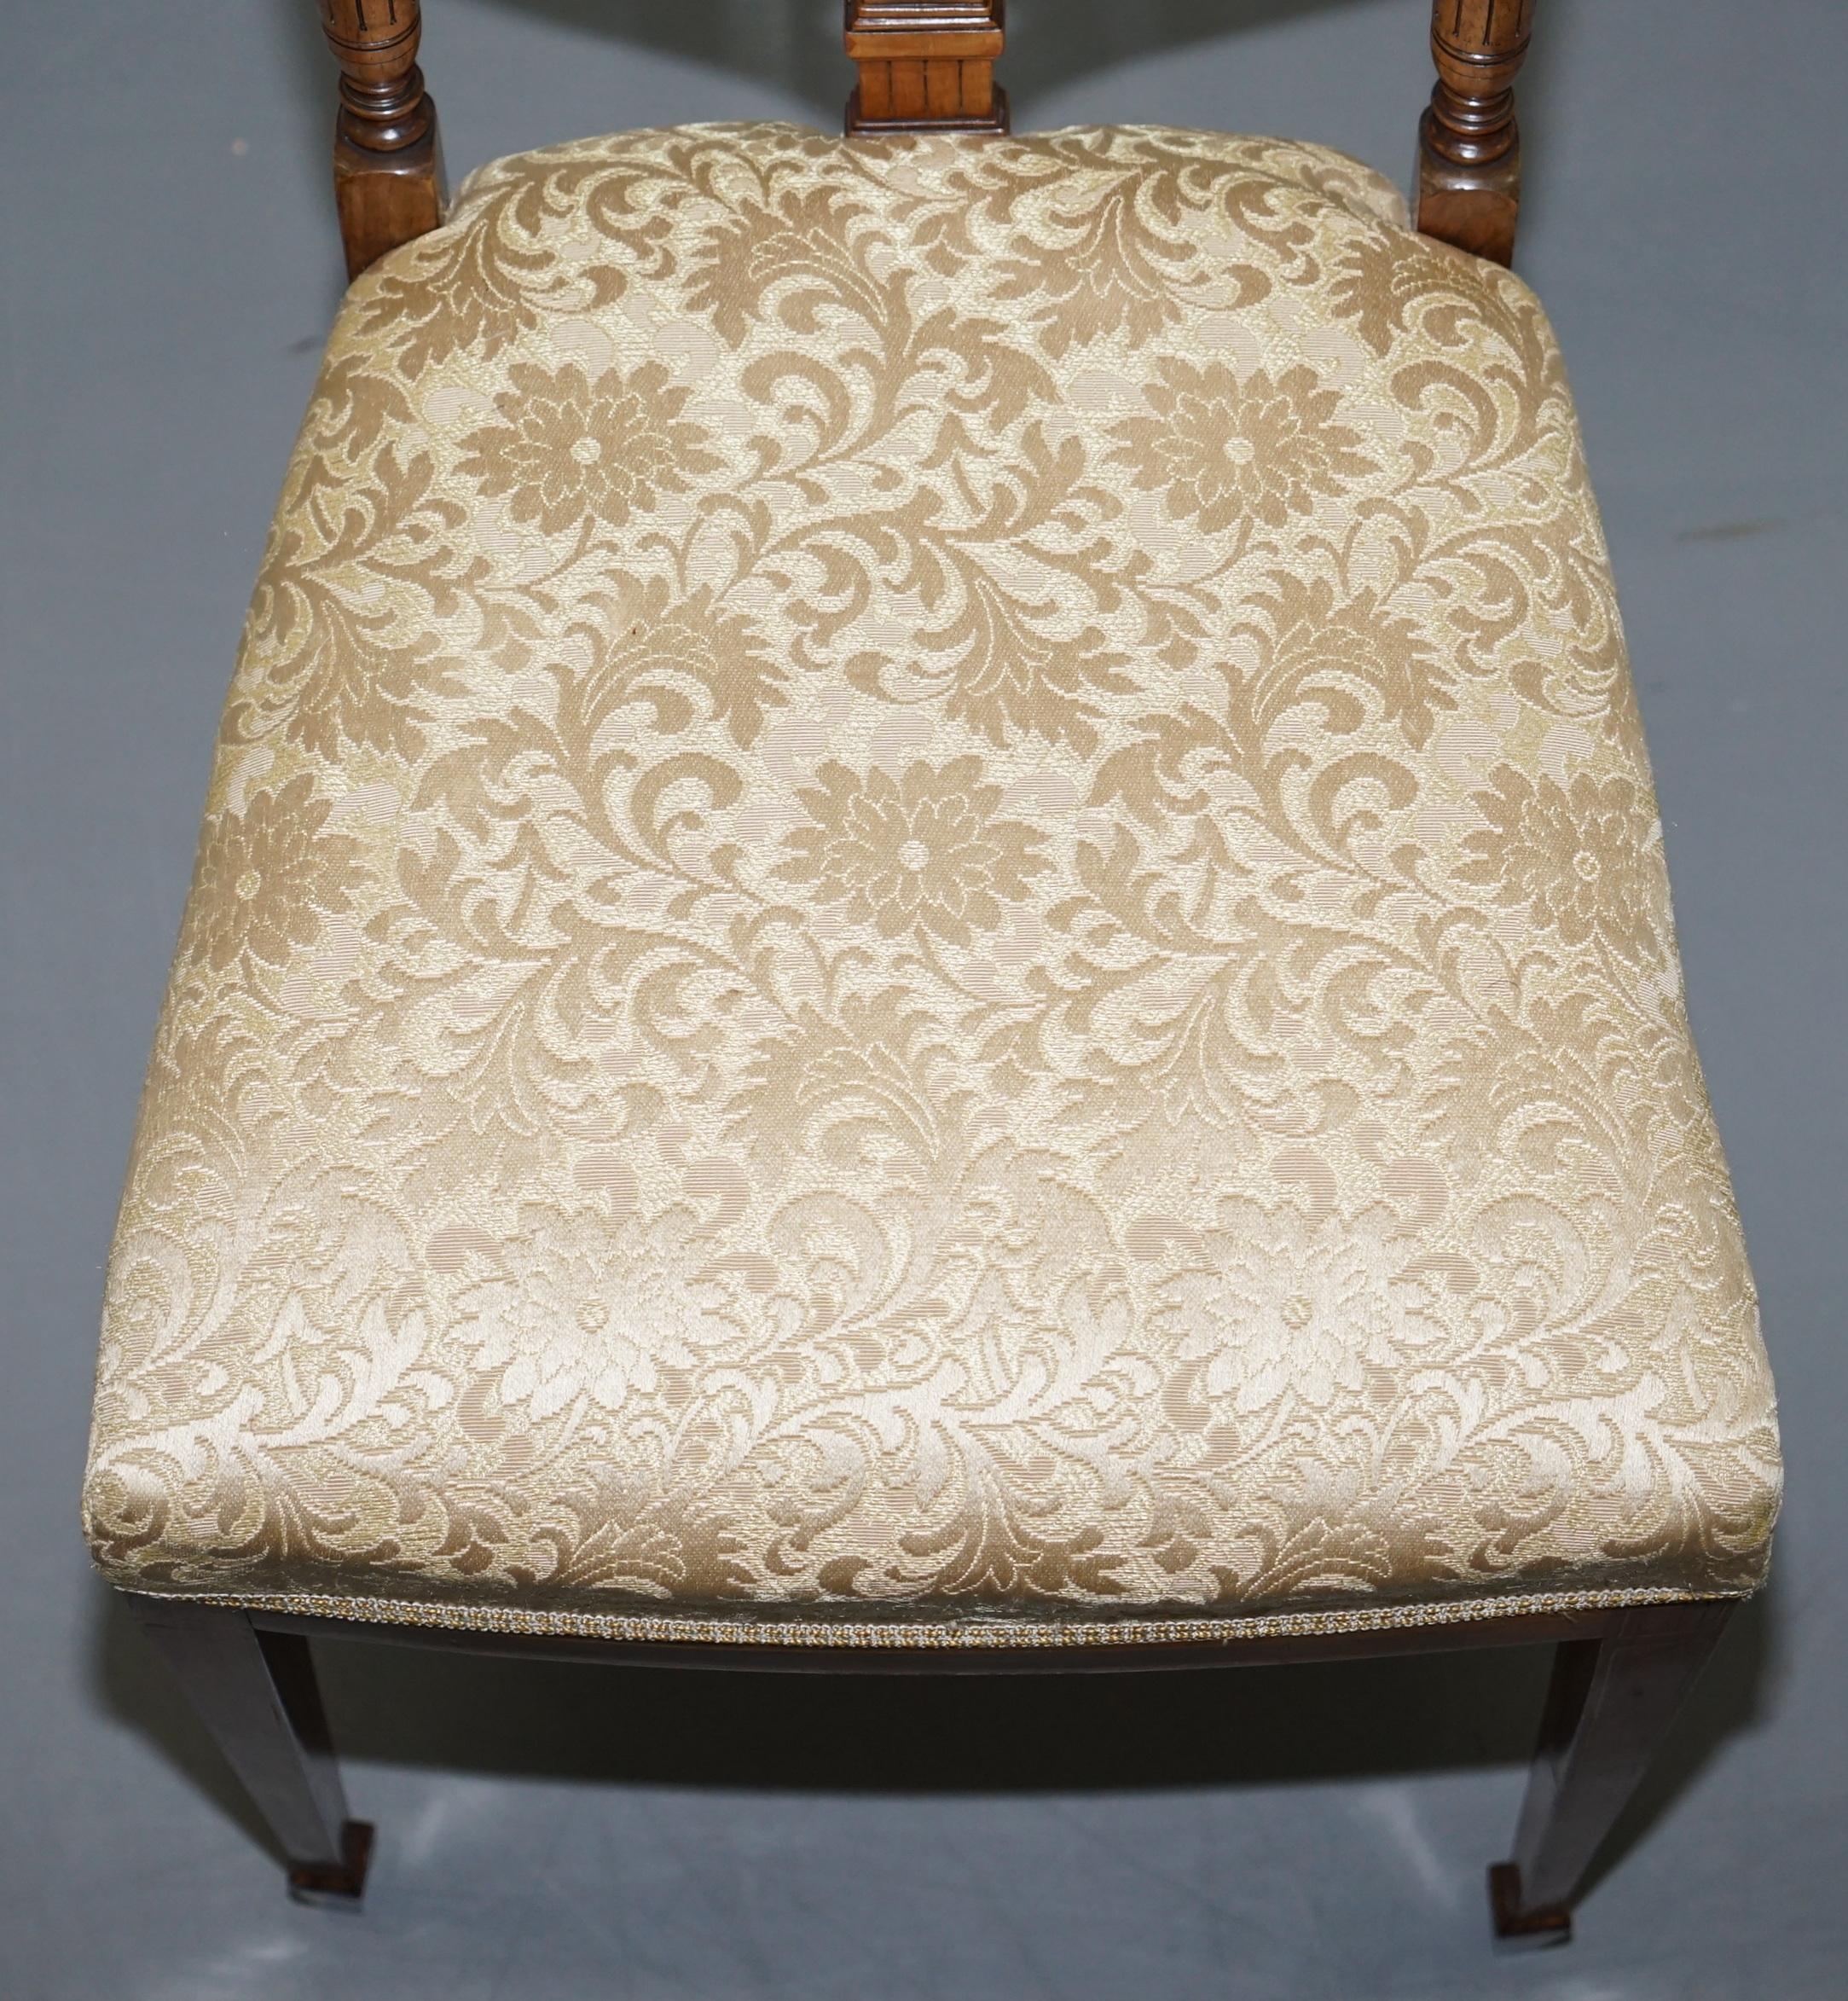 Upholstery Stunning Redwood Sheraton Revival Style Occasional Chair Part Lovely Suite